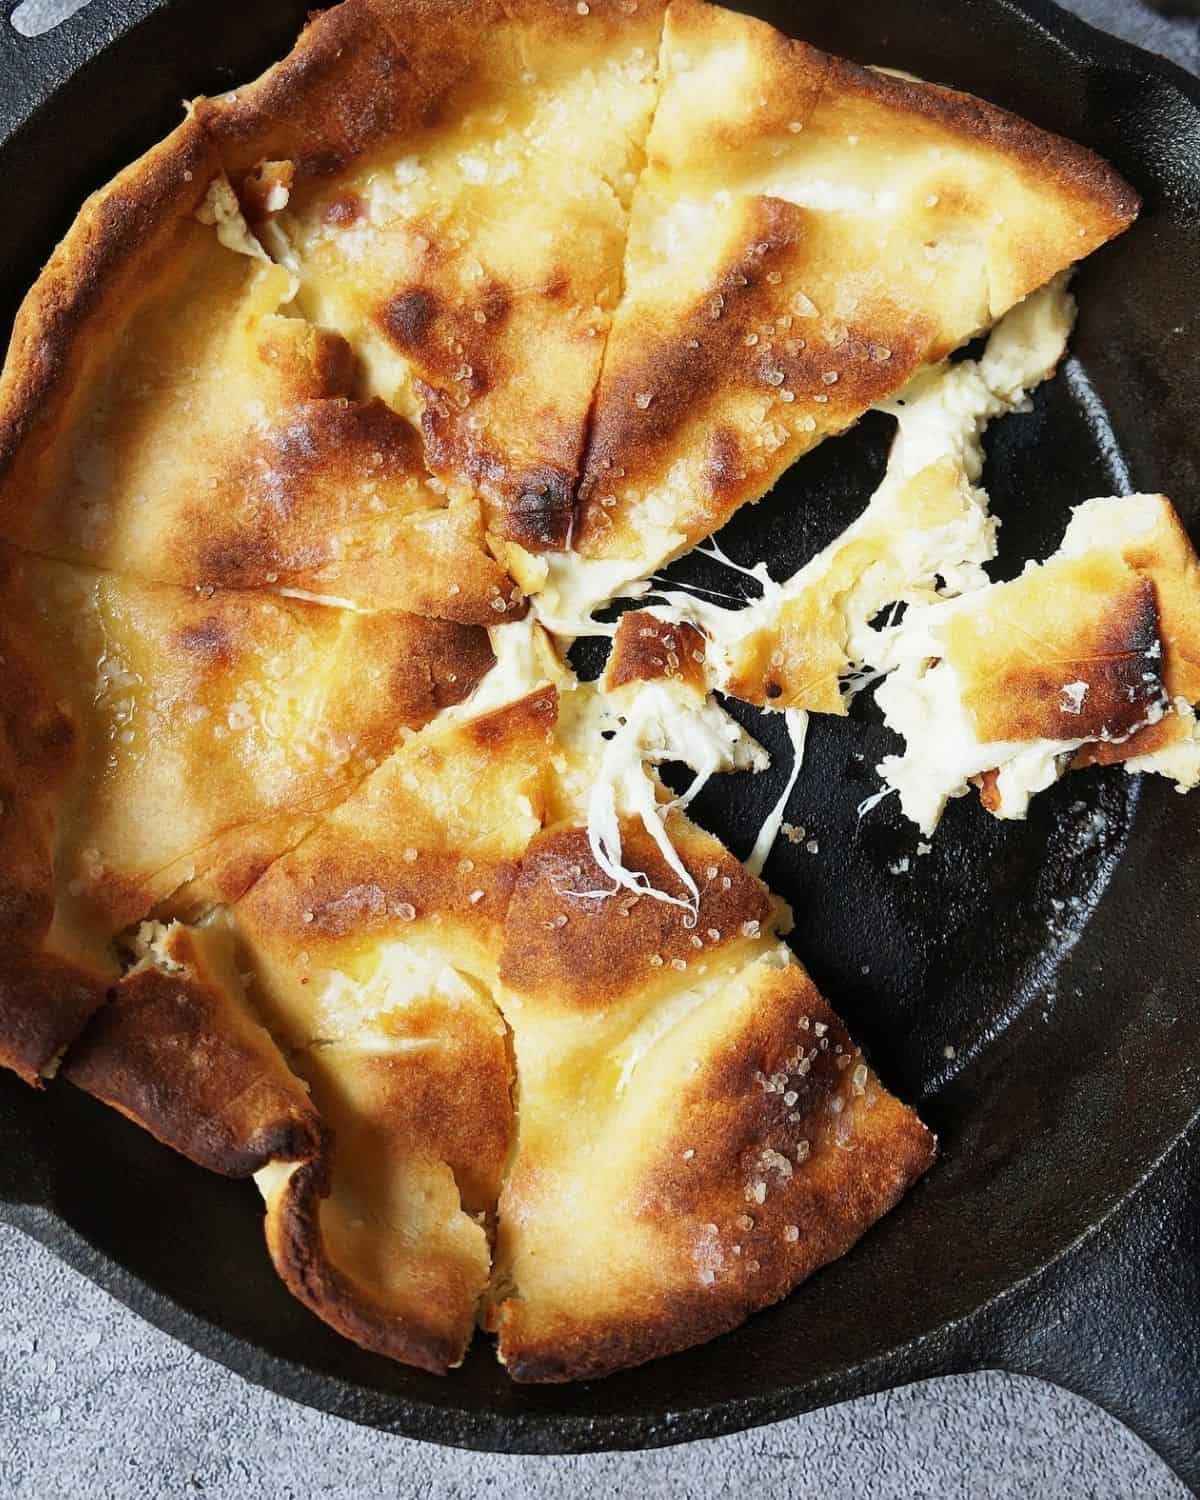 Italian bread in cast iron skillet with one slice pulled apart exposing the cheese